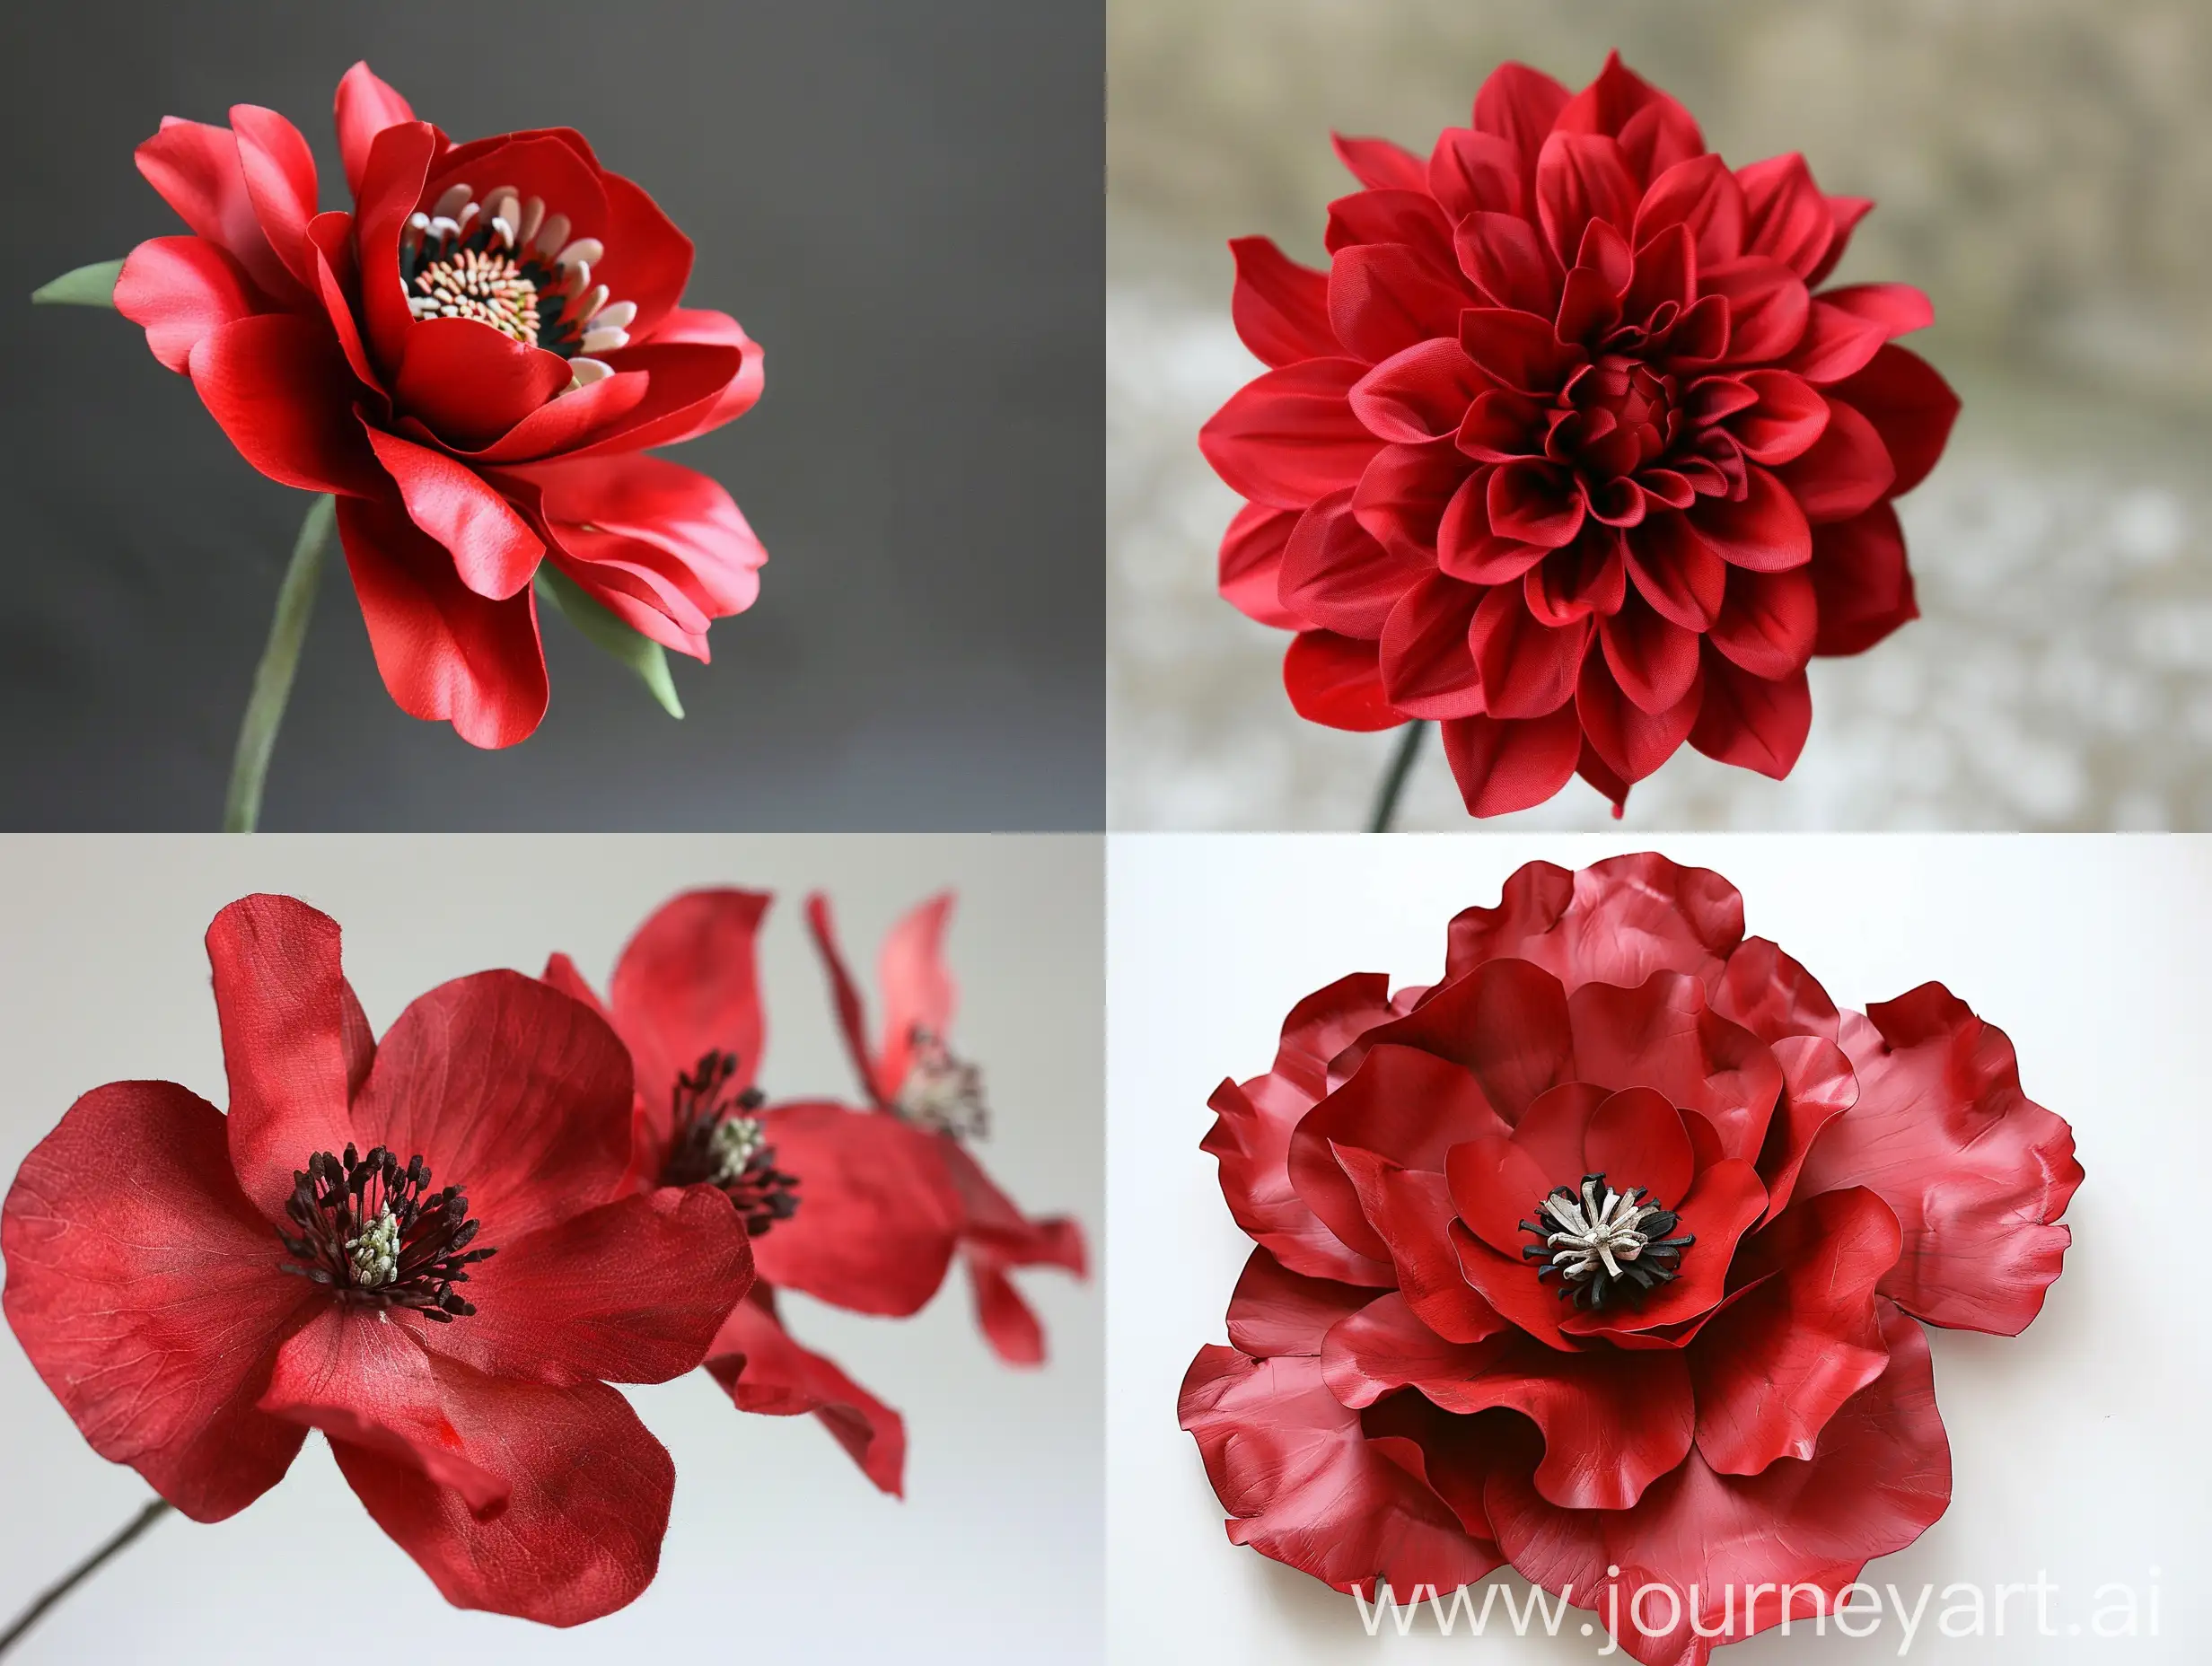 Vibrant-Red-Flower-in-a-Classic-43-Aspect-Ratio